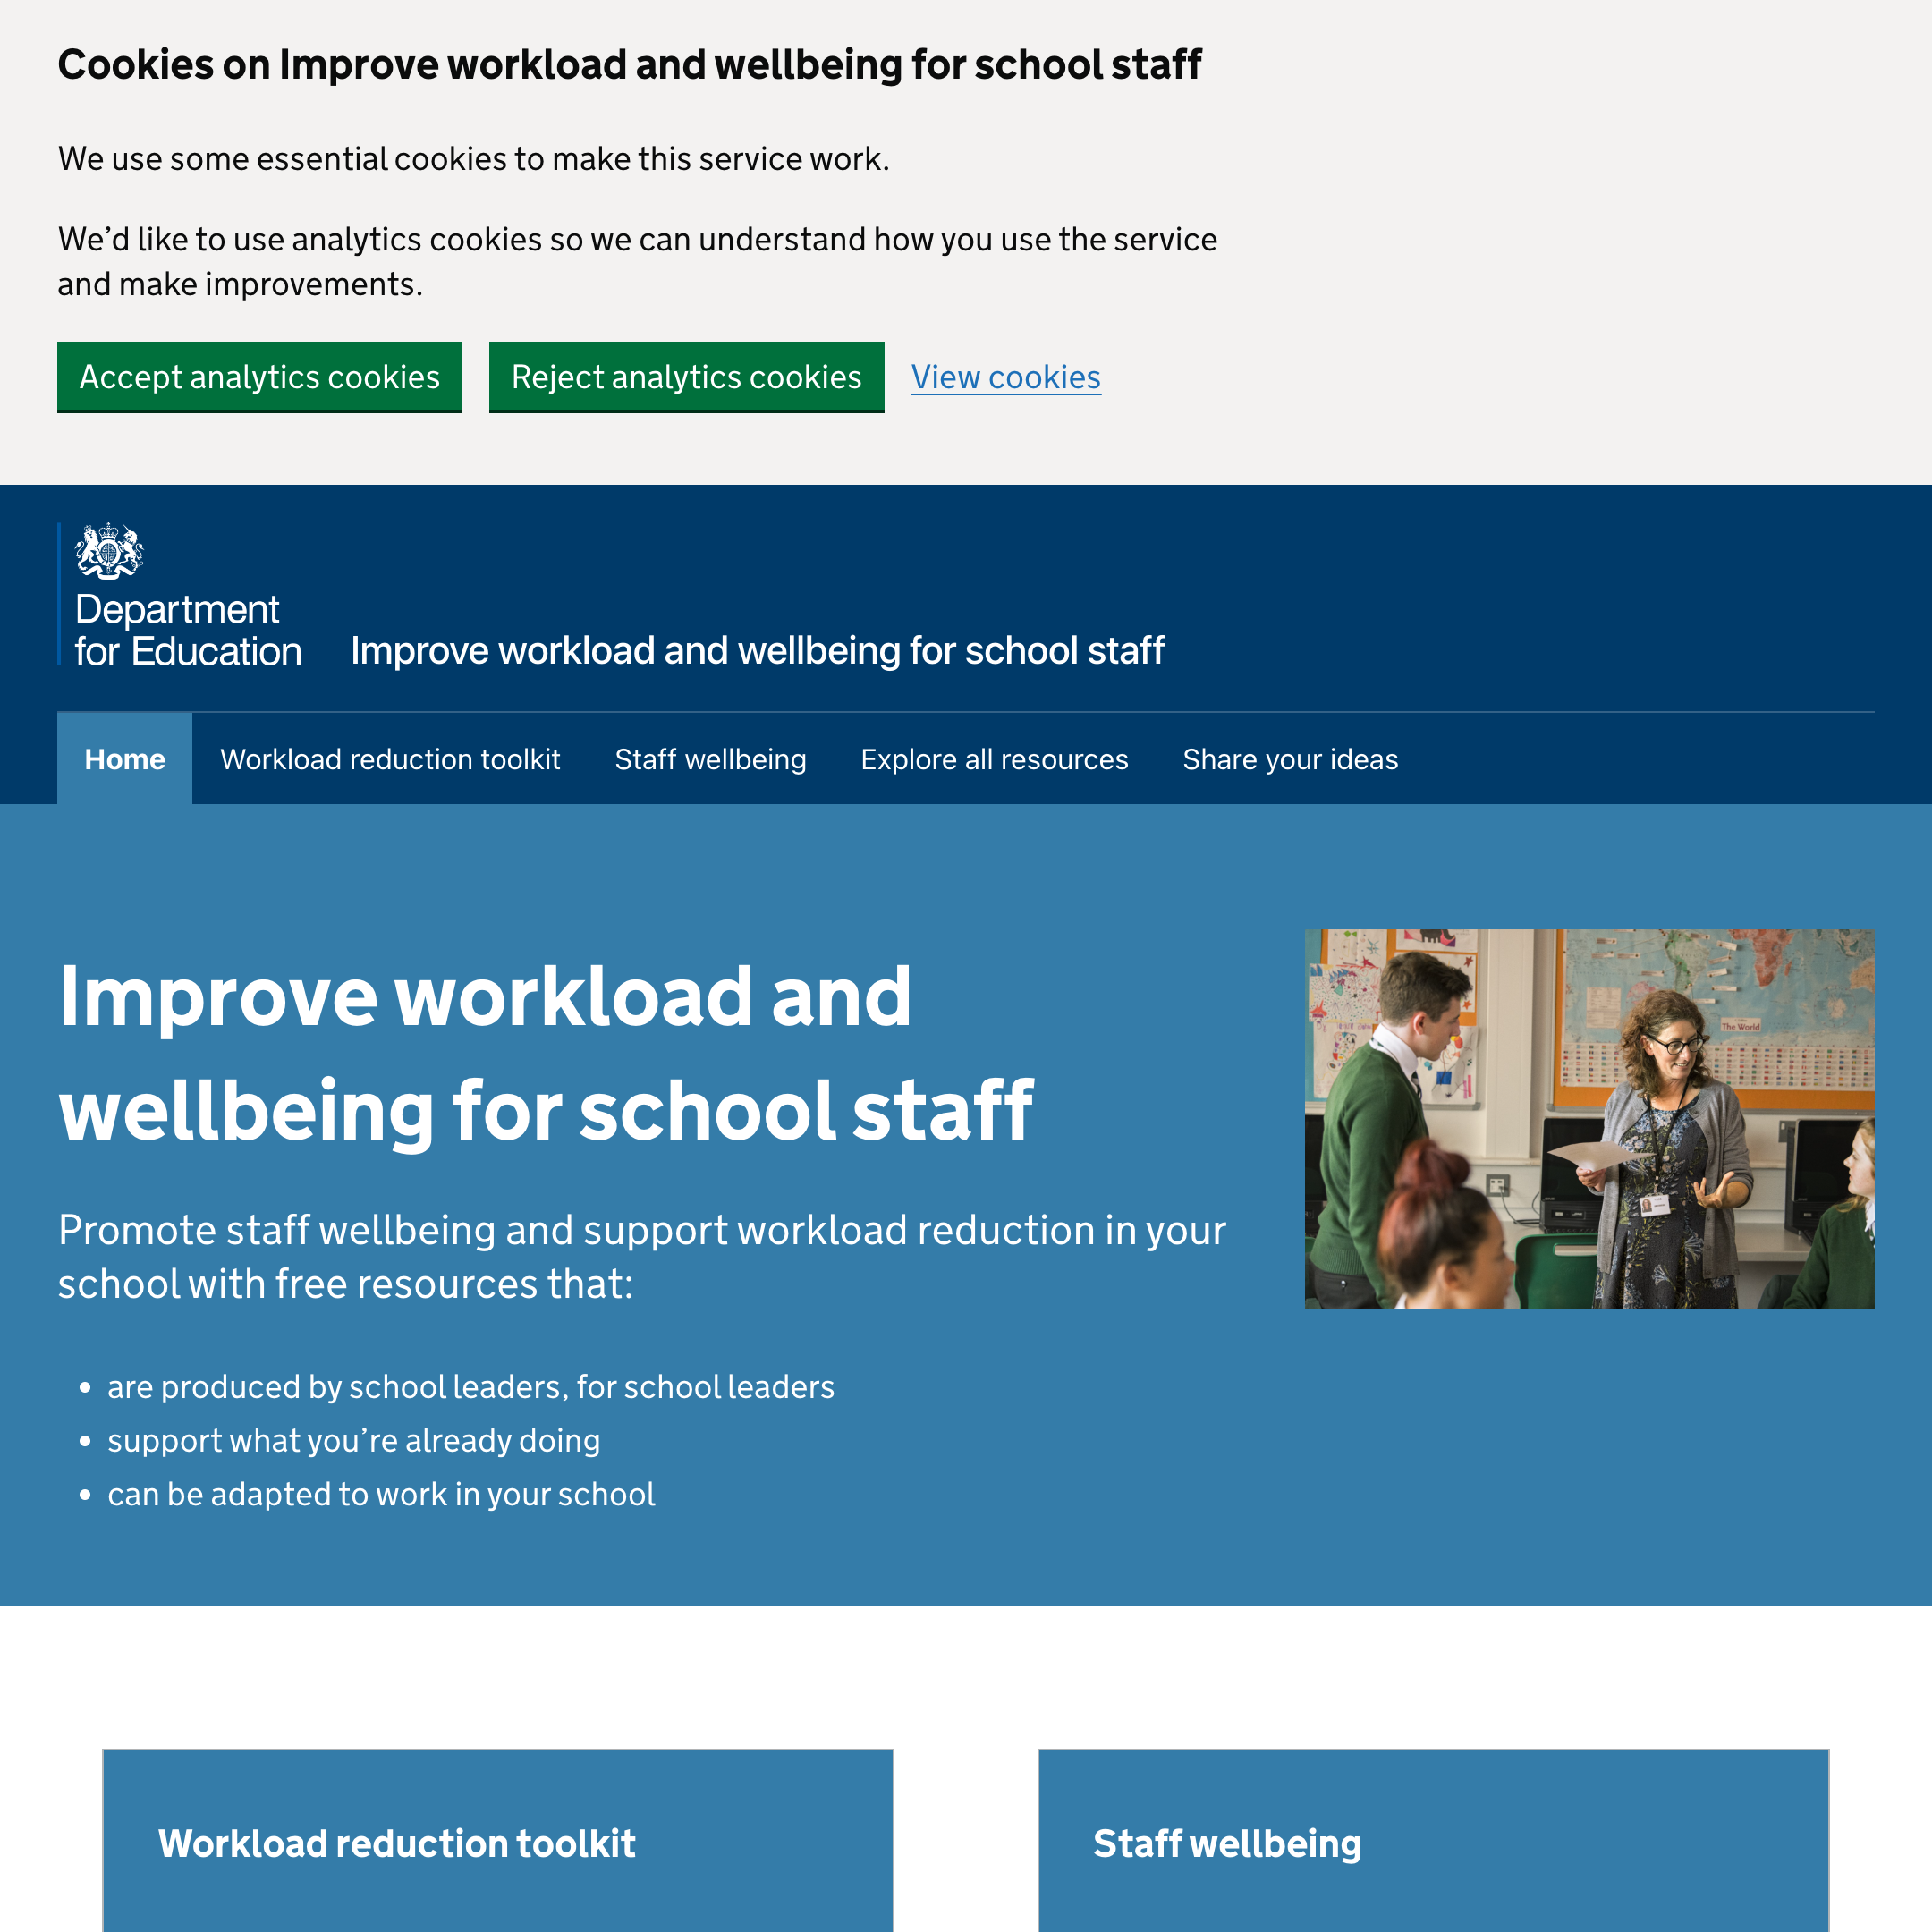 Improve workload and wellbeing for school staff